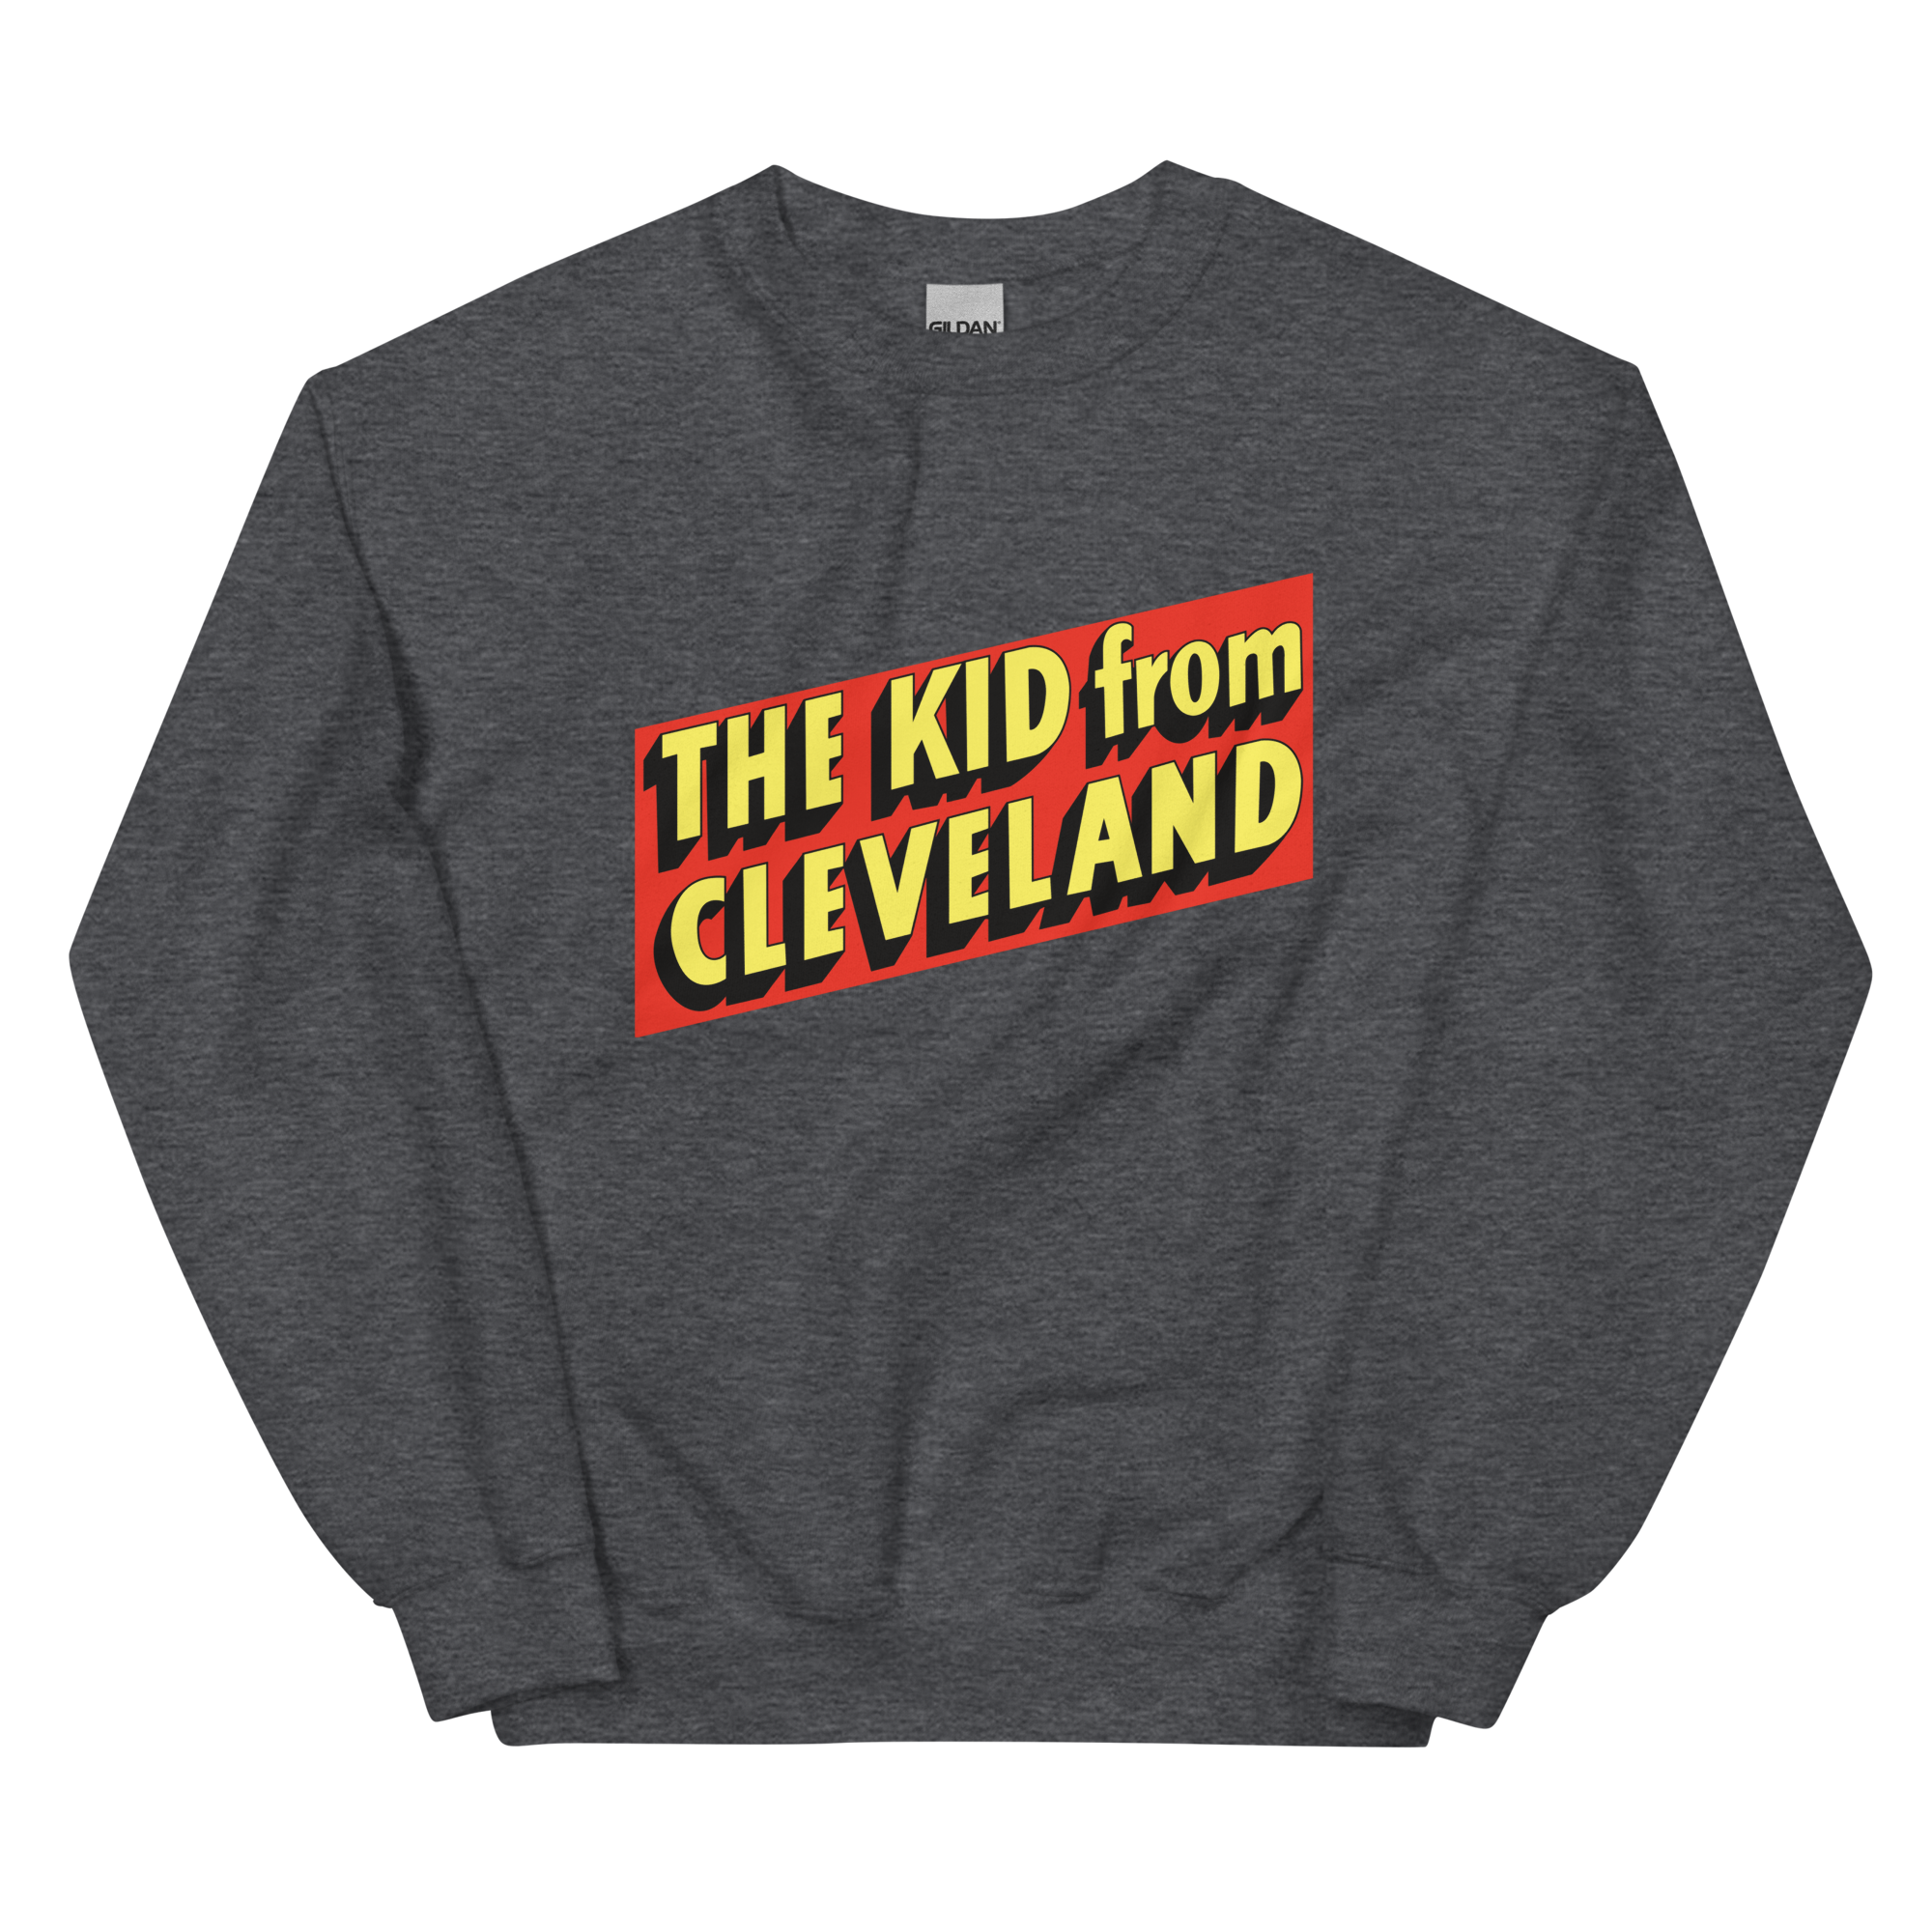 The Kid From Cleveland Sweatshirt